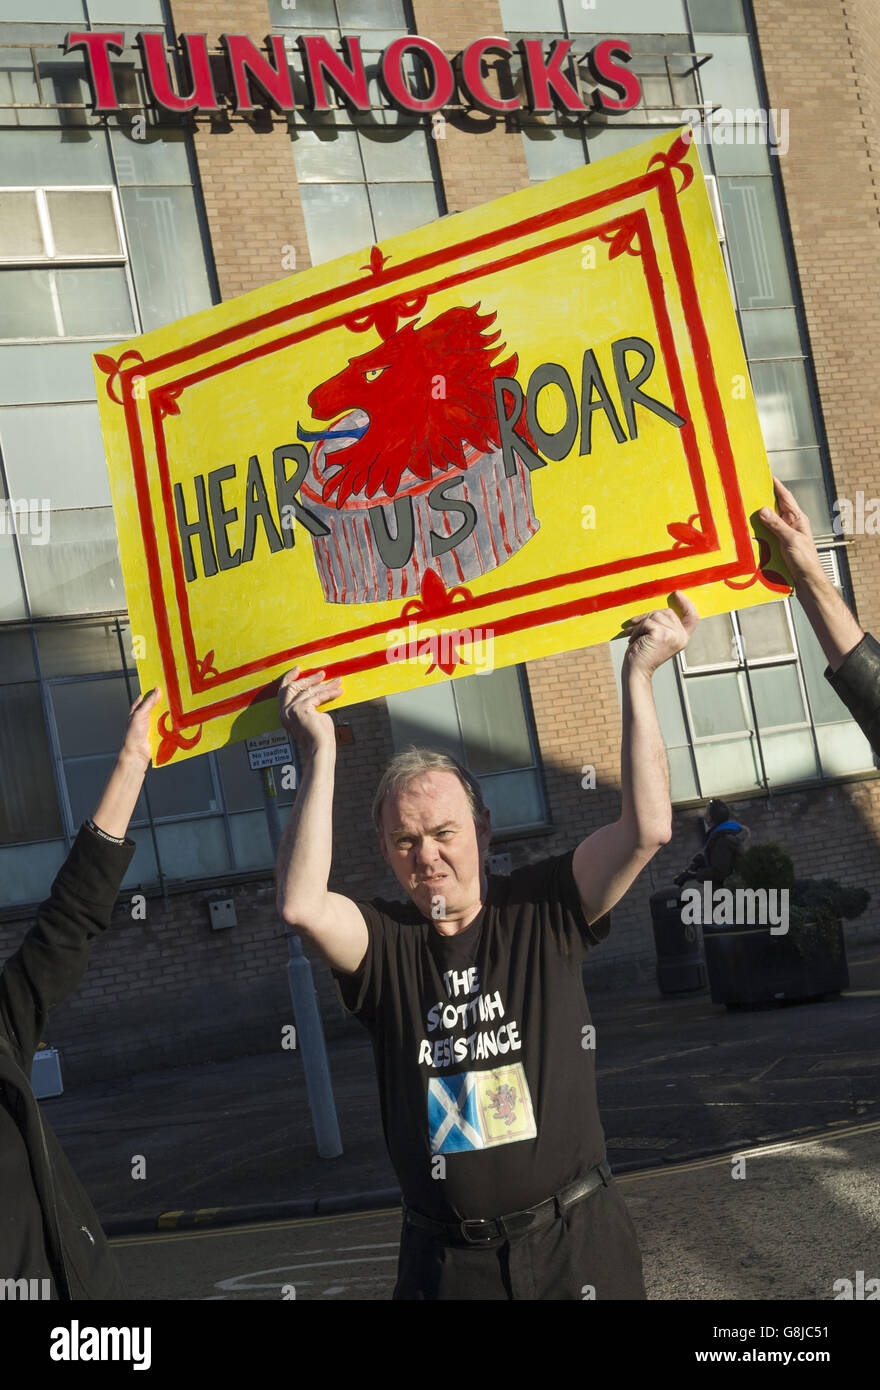 Activist Sean Clerkin from the Scottish Resistance group takes part in a protest outside Tunnock's factory in Uddingston, Lanarkshire, a week after the firm advertised its best-selling biscuit as the Great British Tea Cake. Stock Photo